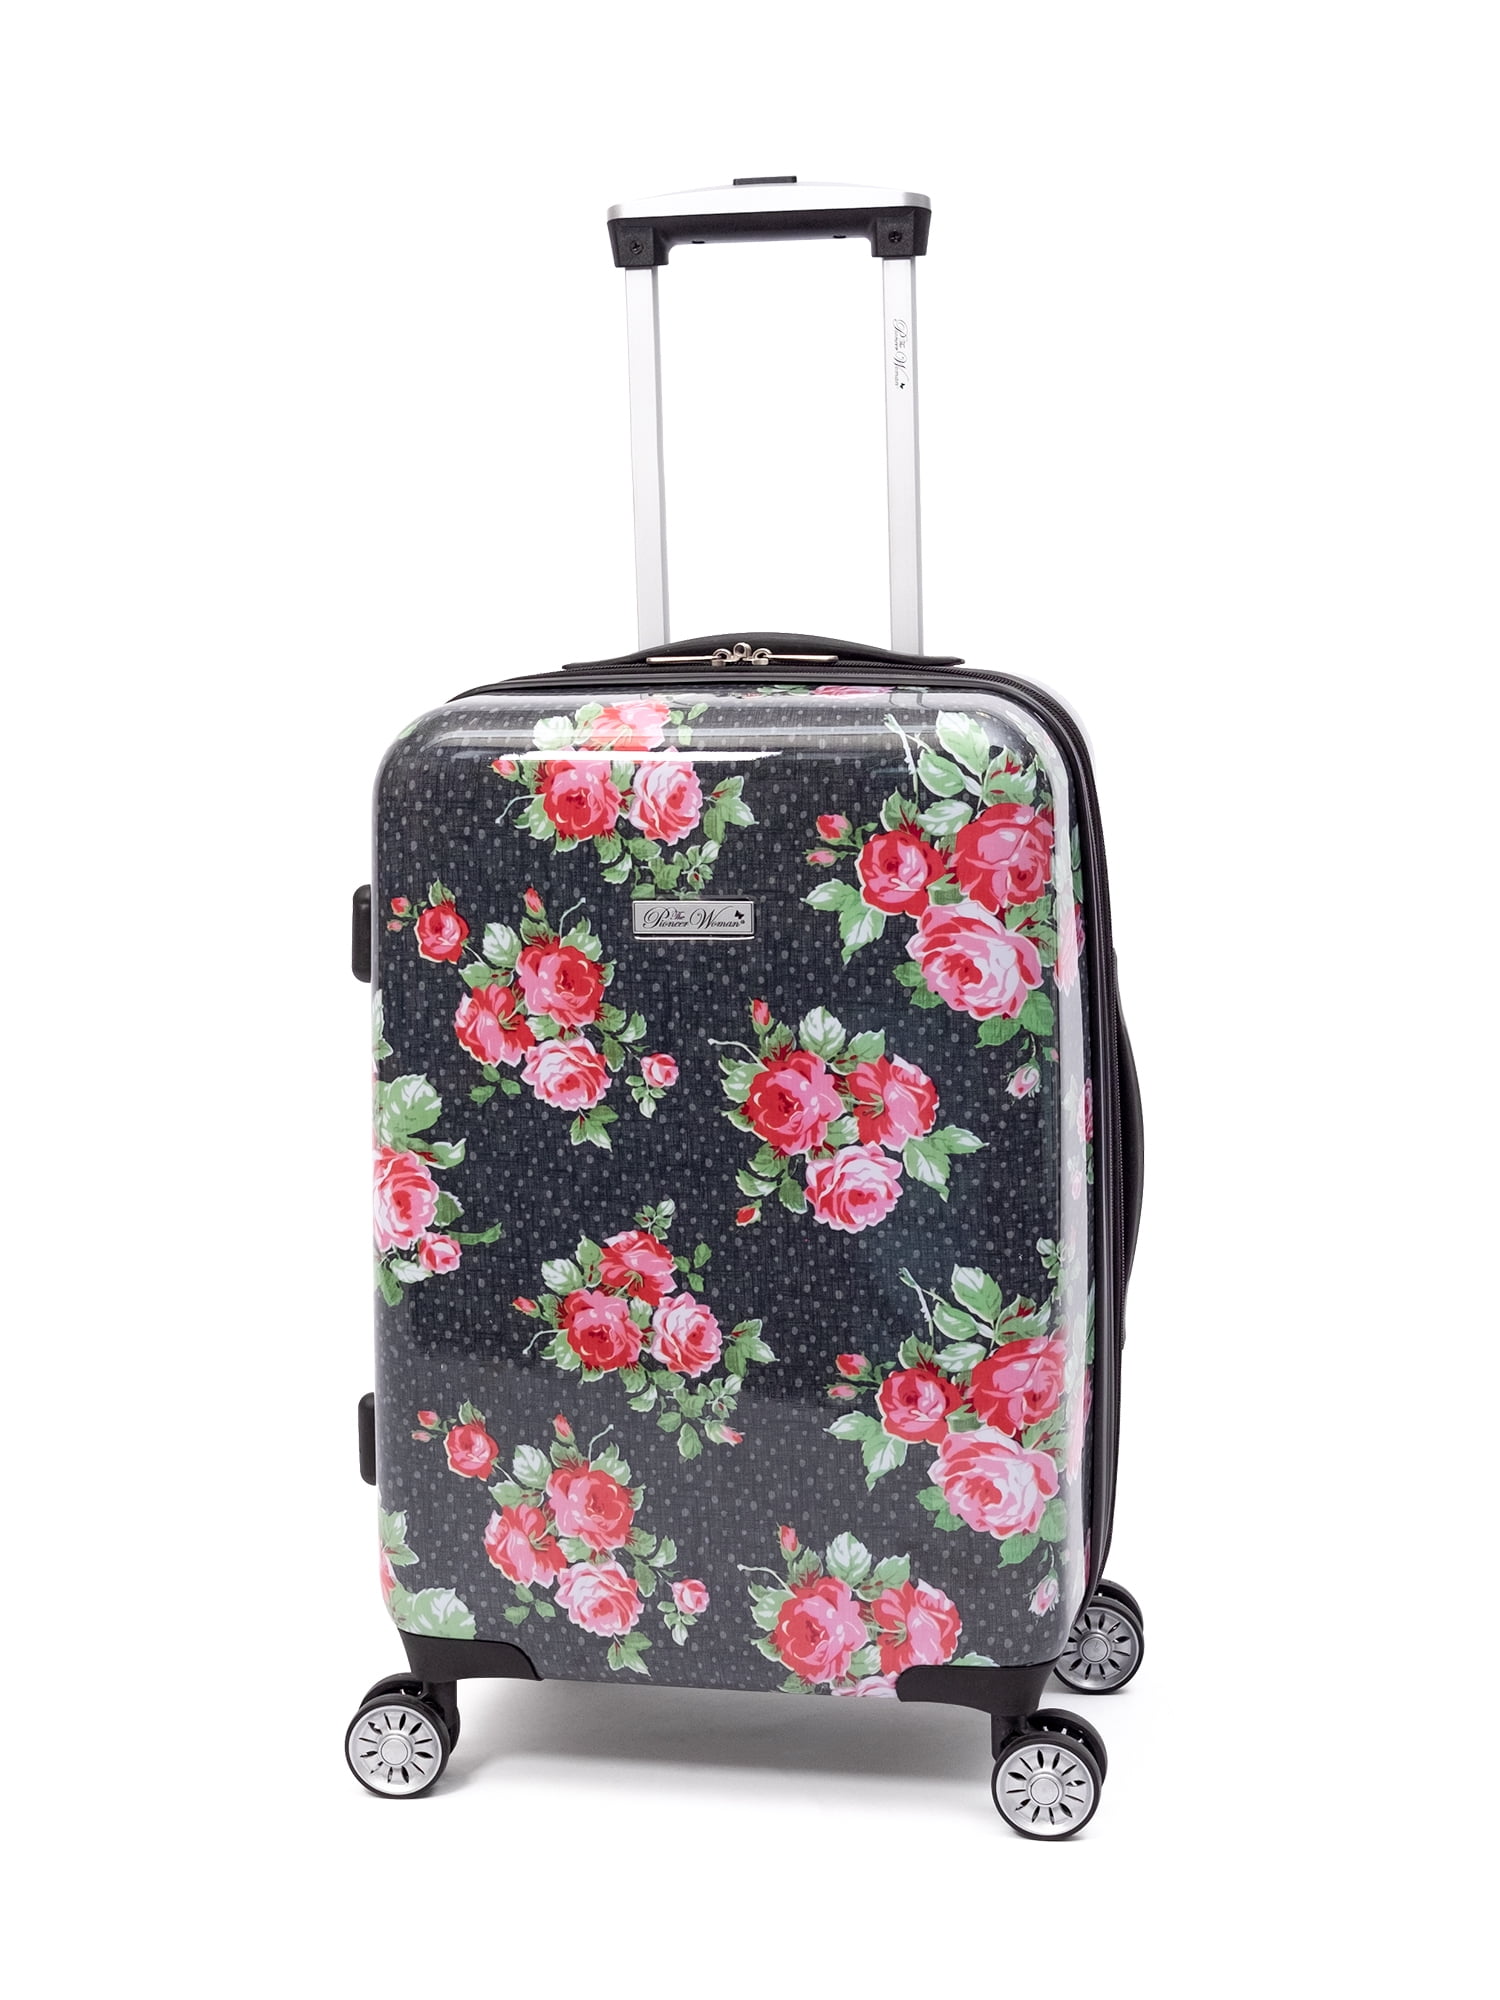 American Girl Travel in Style Rolling Luggage Suitcase doll sized NEW!